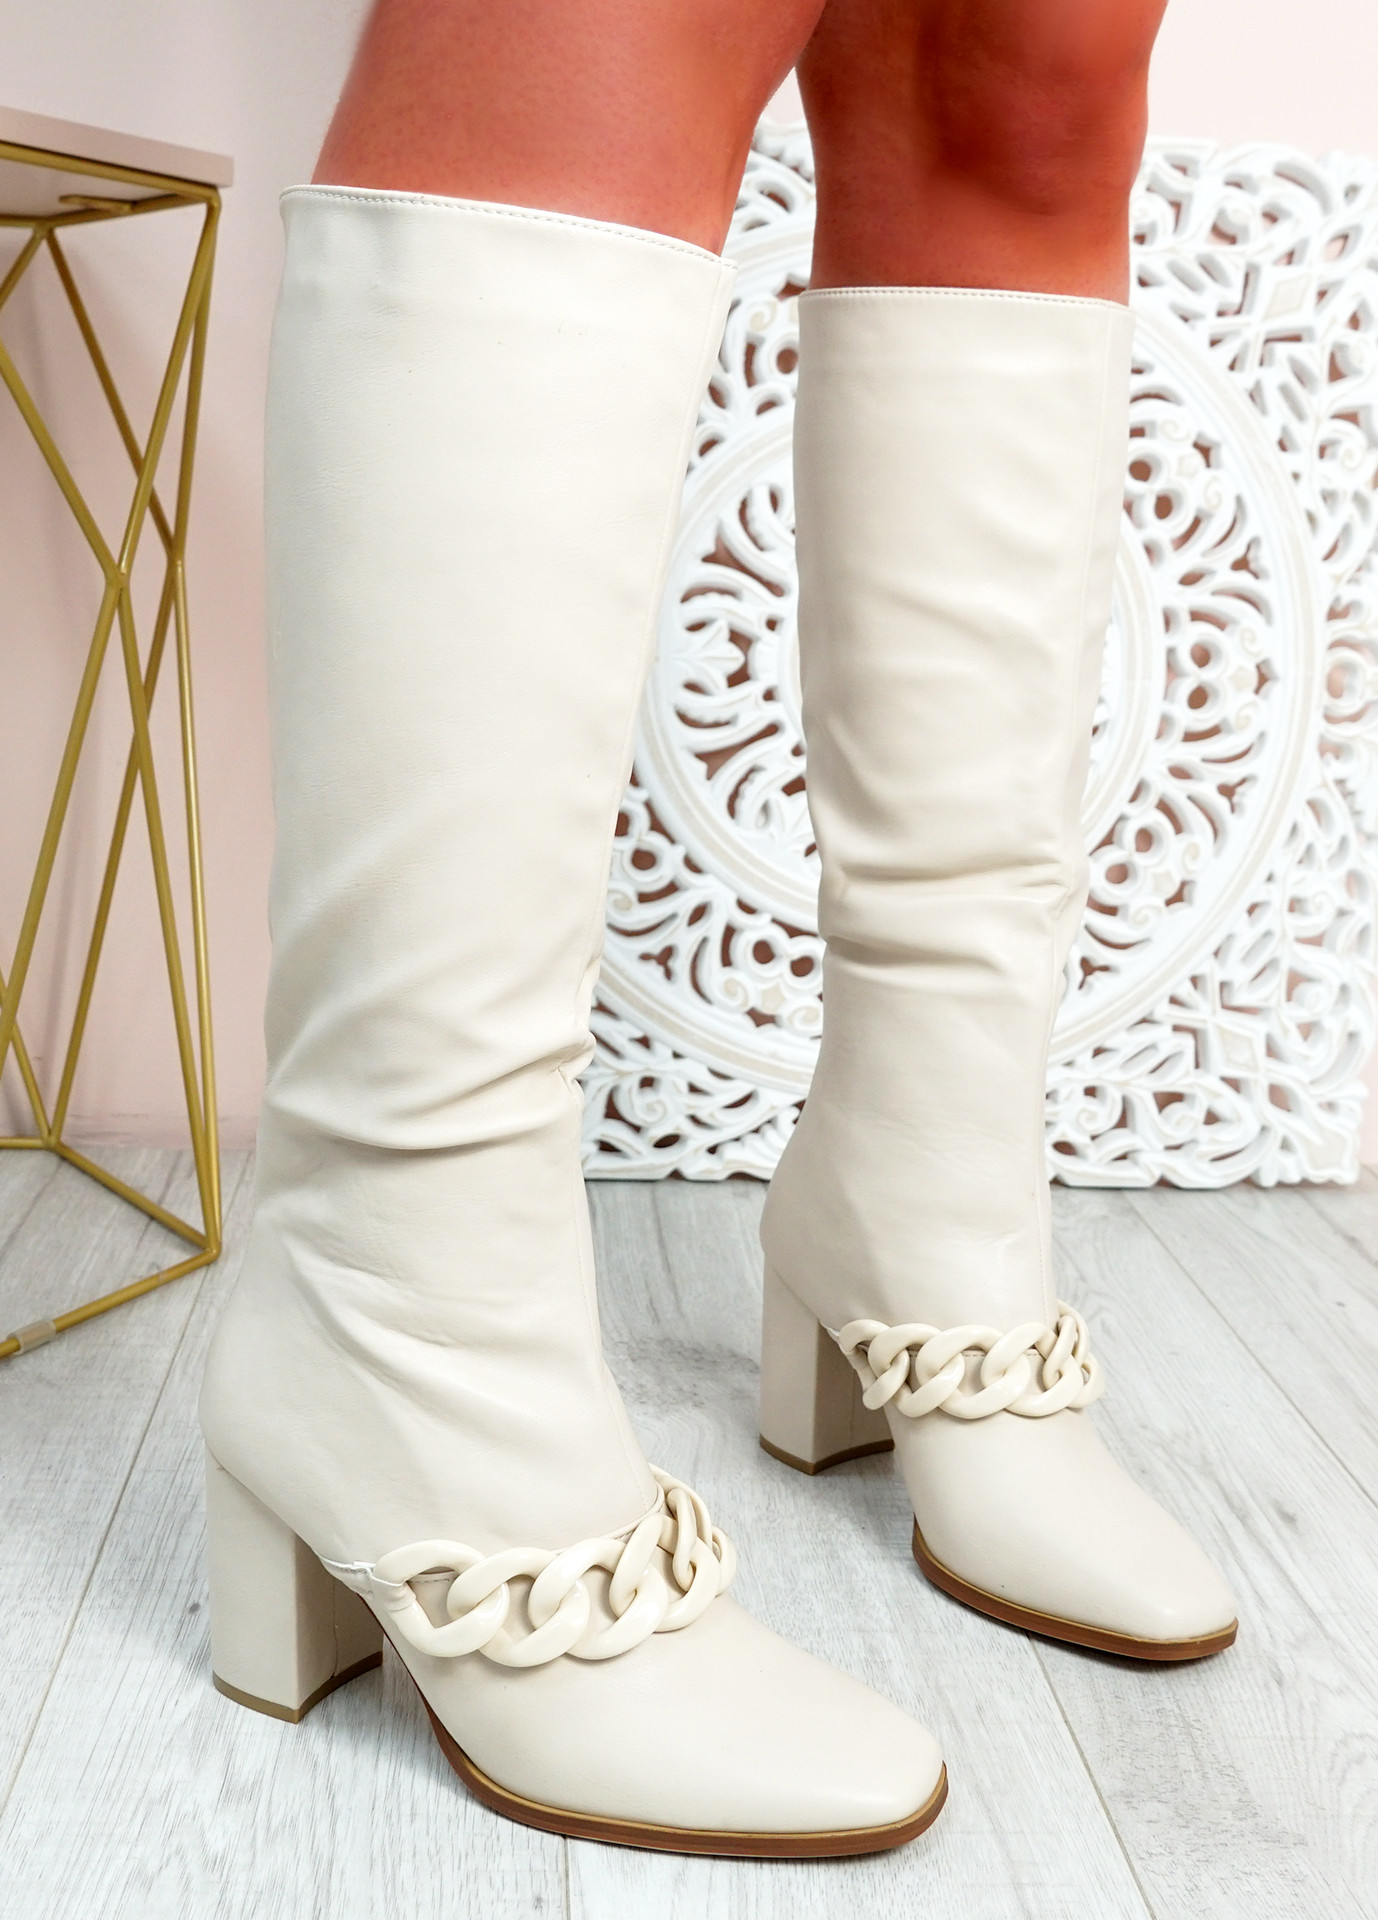 Buy The White Pole Long Boots Classic Design Western Wears Shoes Stylish  Short Boots For Womens & Girls at Amazon.in